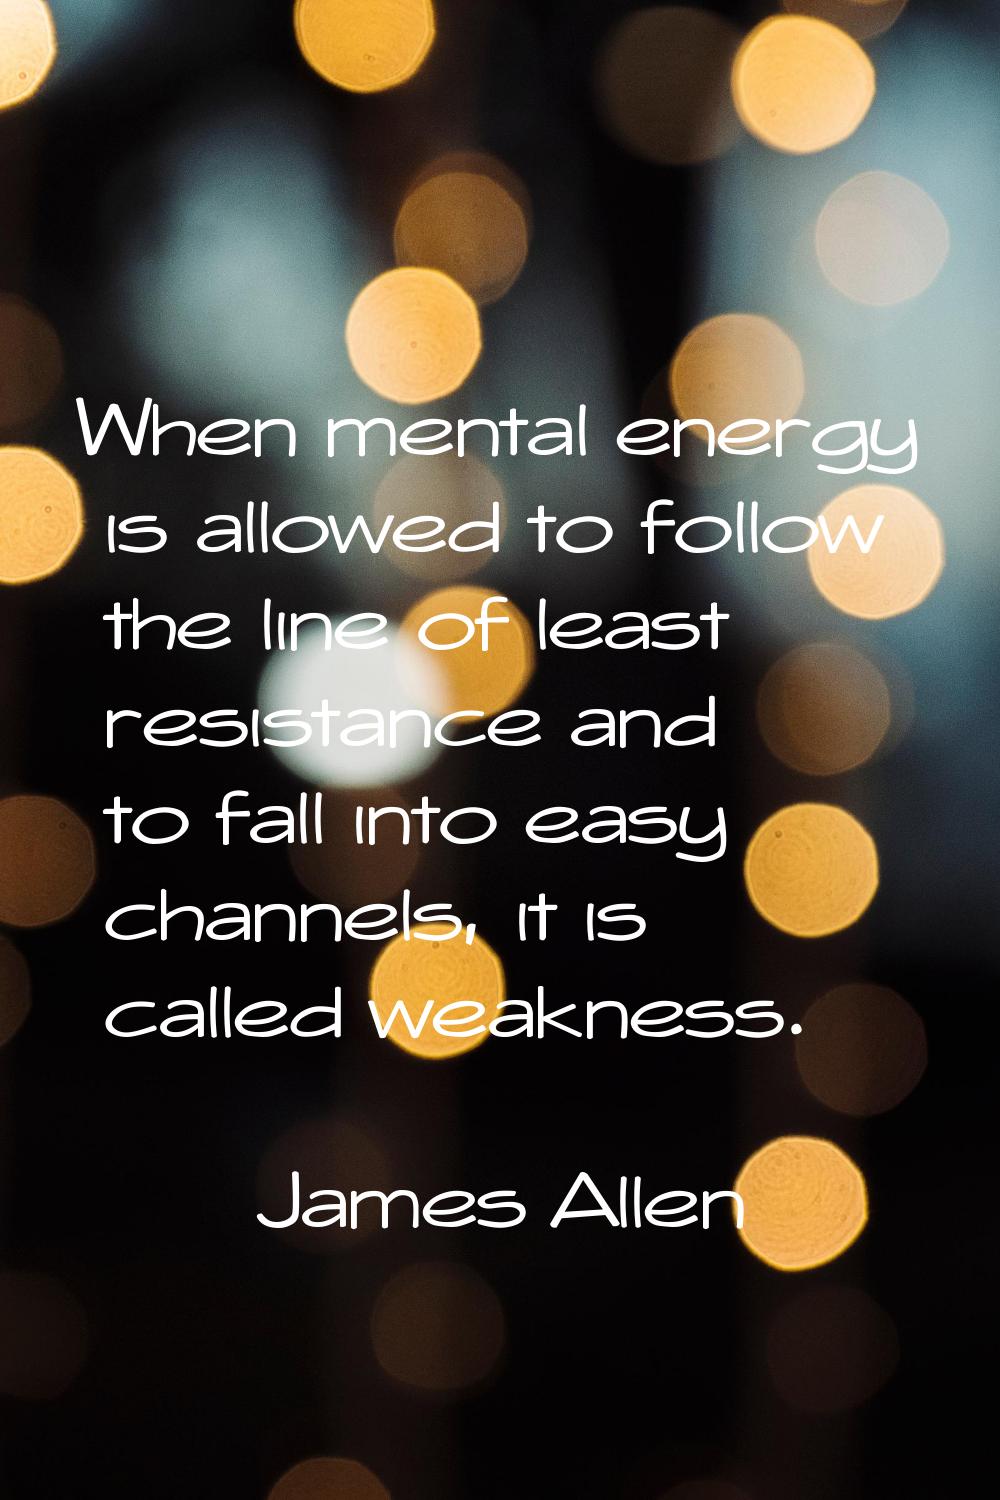 When mental energy is allowed to follow the line of least resistance and to fall into easy channels